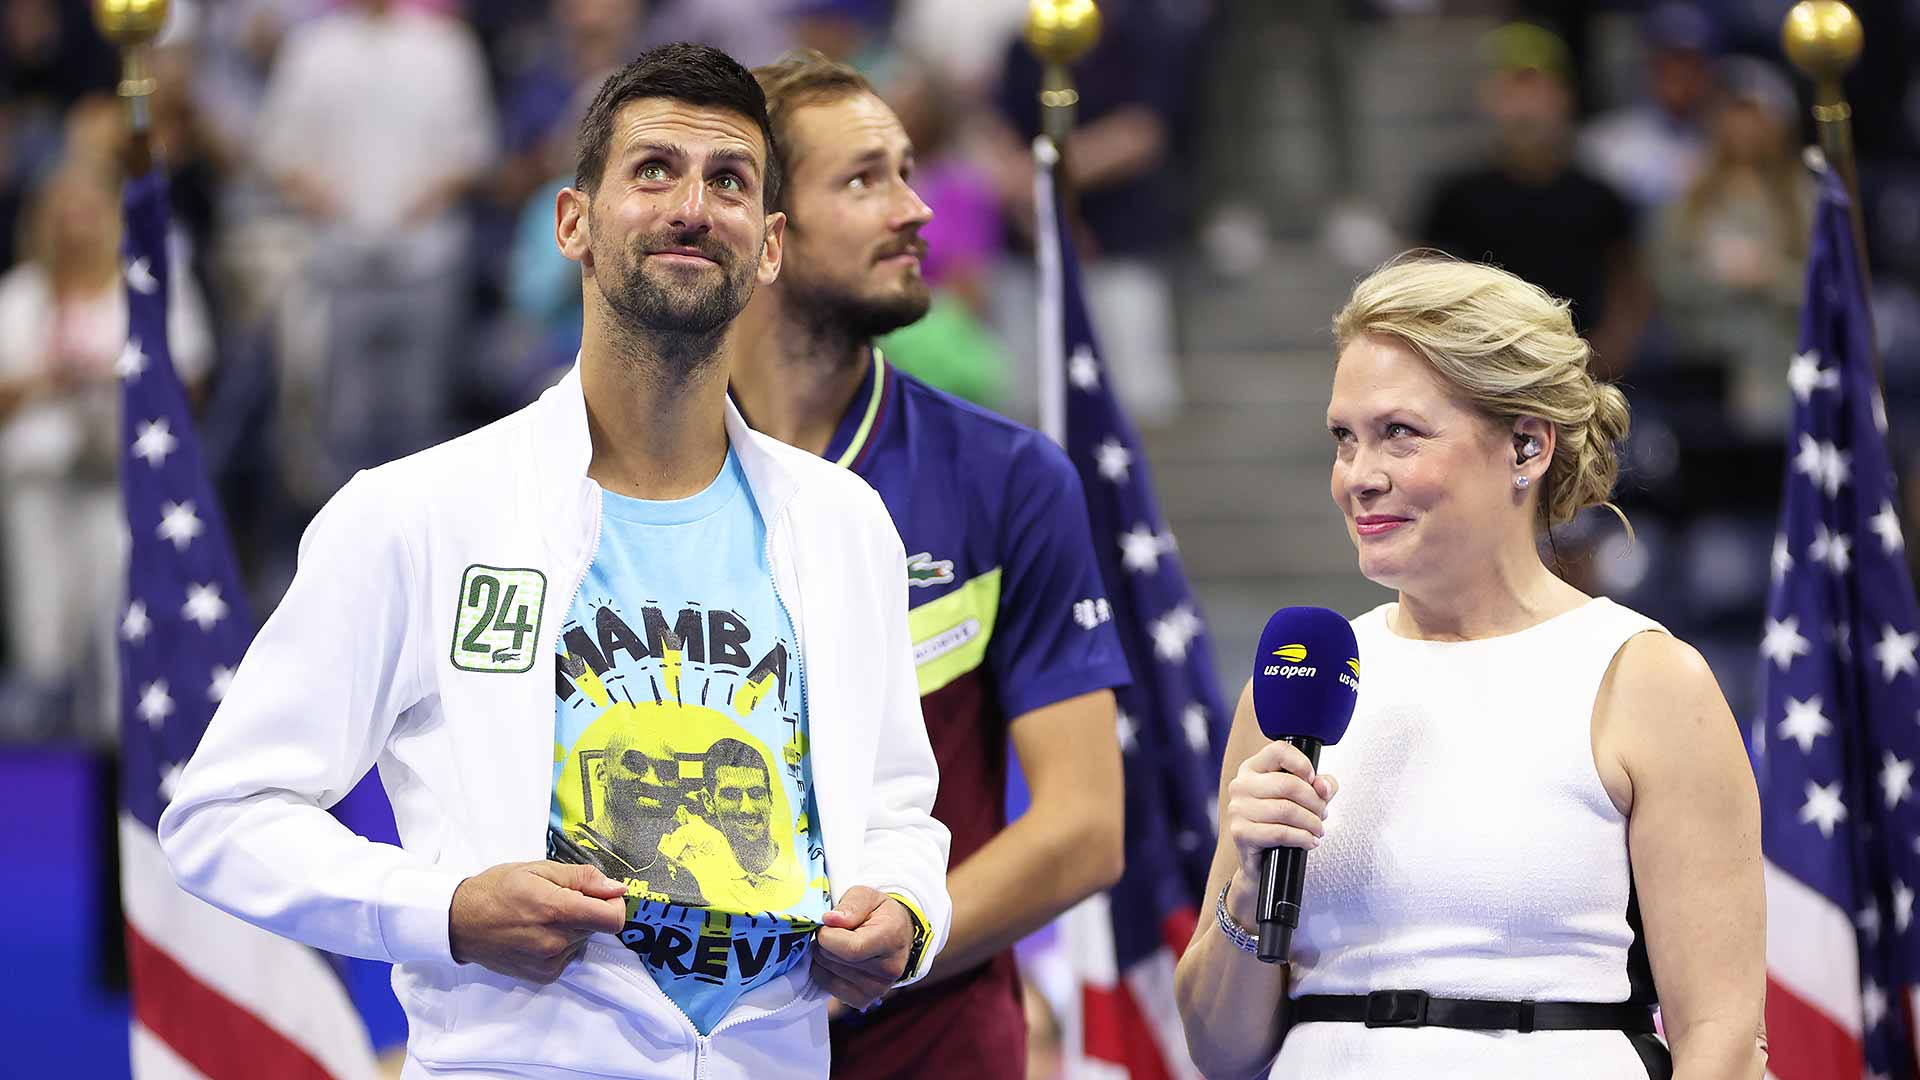 Novak Djokovic pays tribute to the late Kobe Bryant during the US Open trophy ceremony.